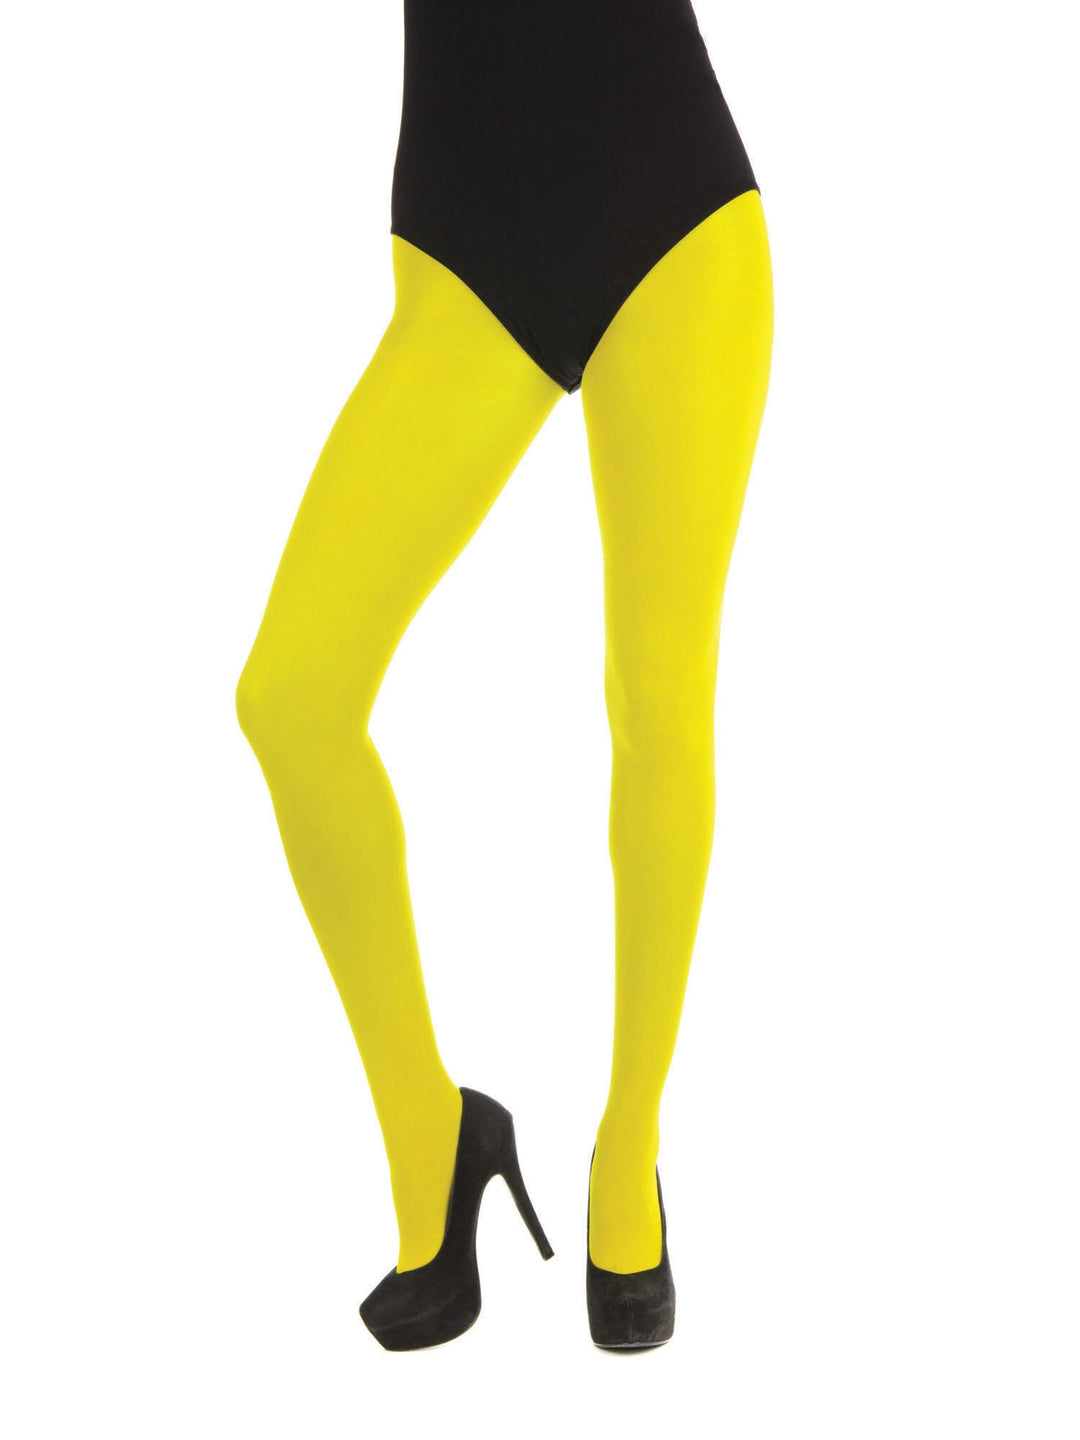 Yellow Tights Ladies Costume Accessory_2